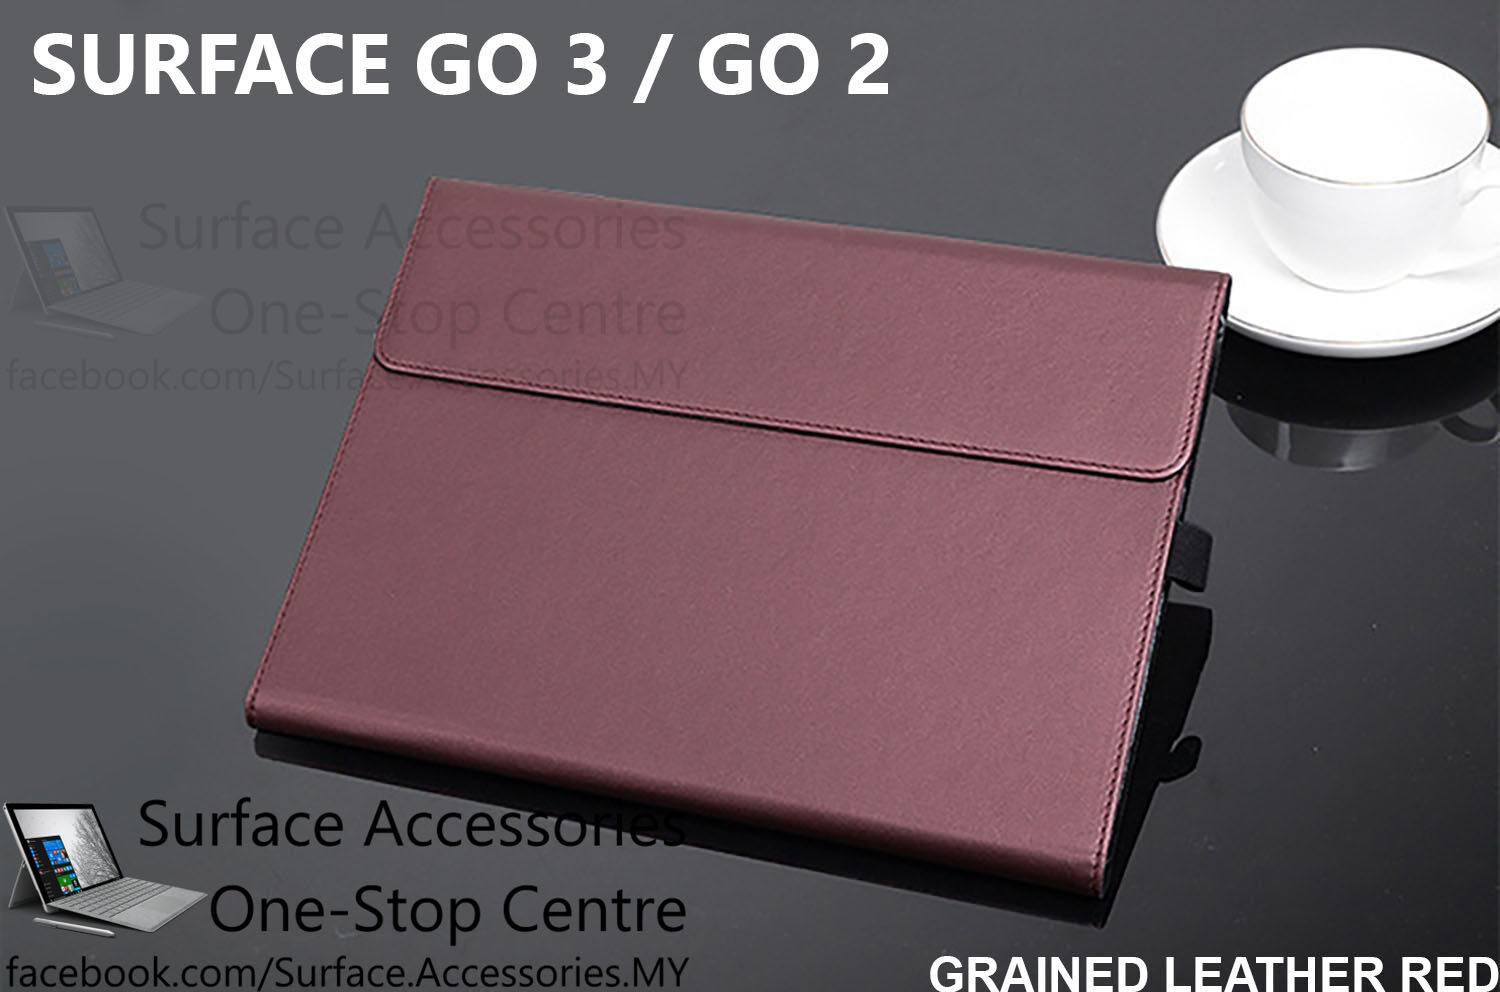 [MALAYSIA]Microsoft Surface Go 3 Case Surface Go 3 Cover Premium Ultimate Case Stand Flip Case Surface Go 2 Cover Premium Ultimate Case Stand Flip Case Surface Go 2 Case Surface Go 2 Casing Premium Ultimate Case Stand Flip Case Surface Go Casing